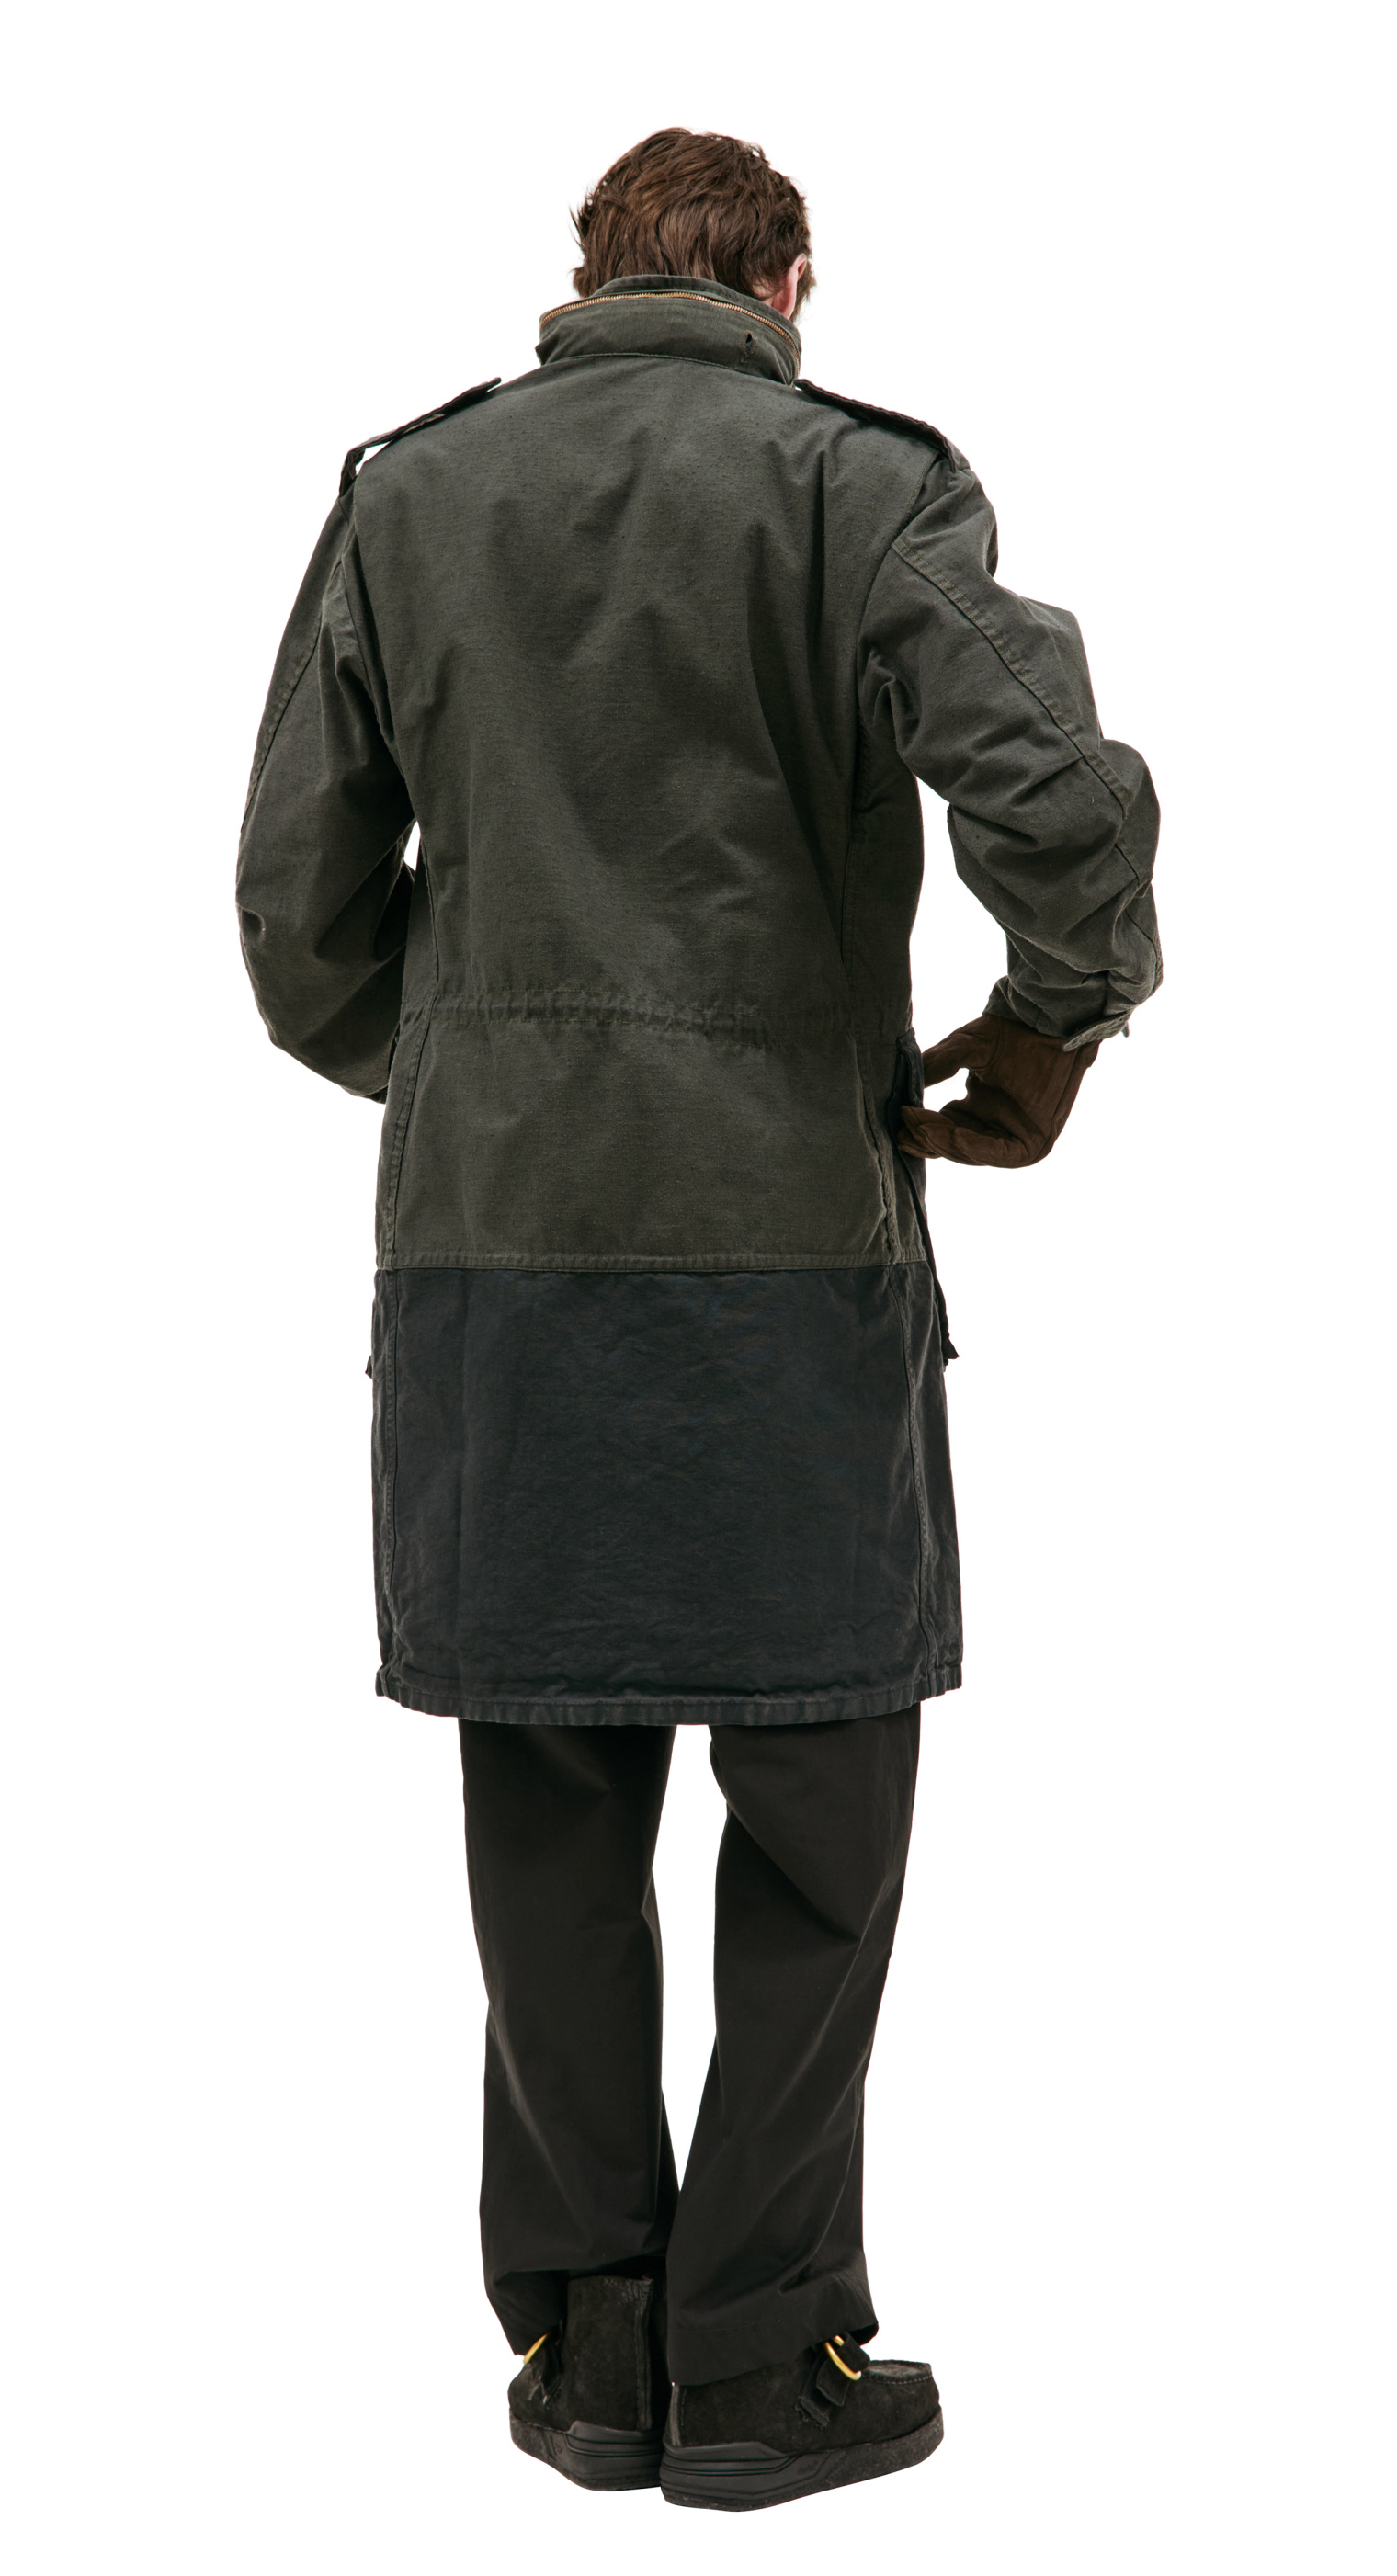 OAMC Re:Work coat with pockets